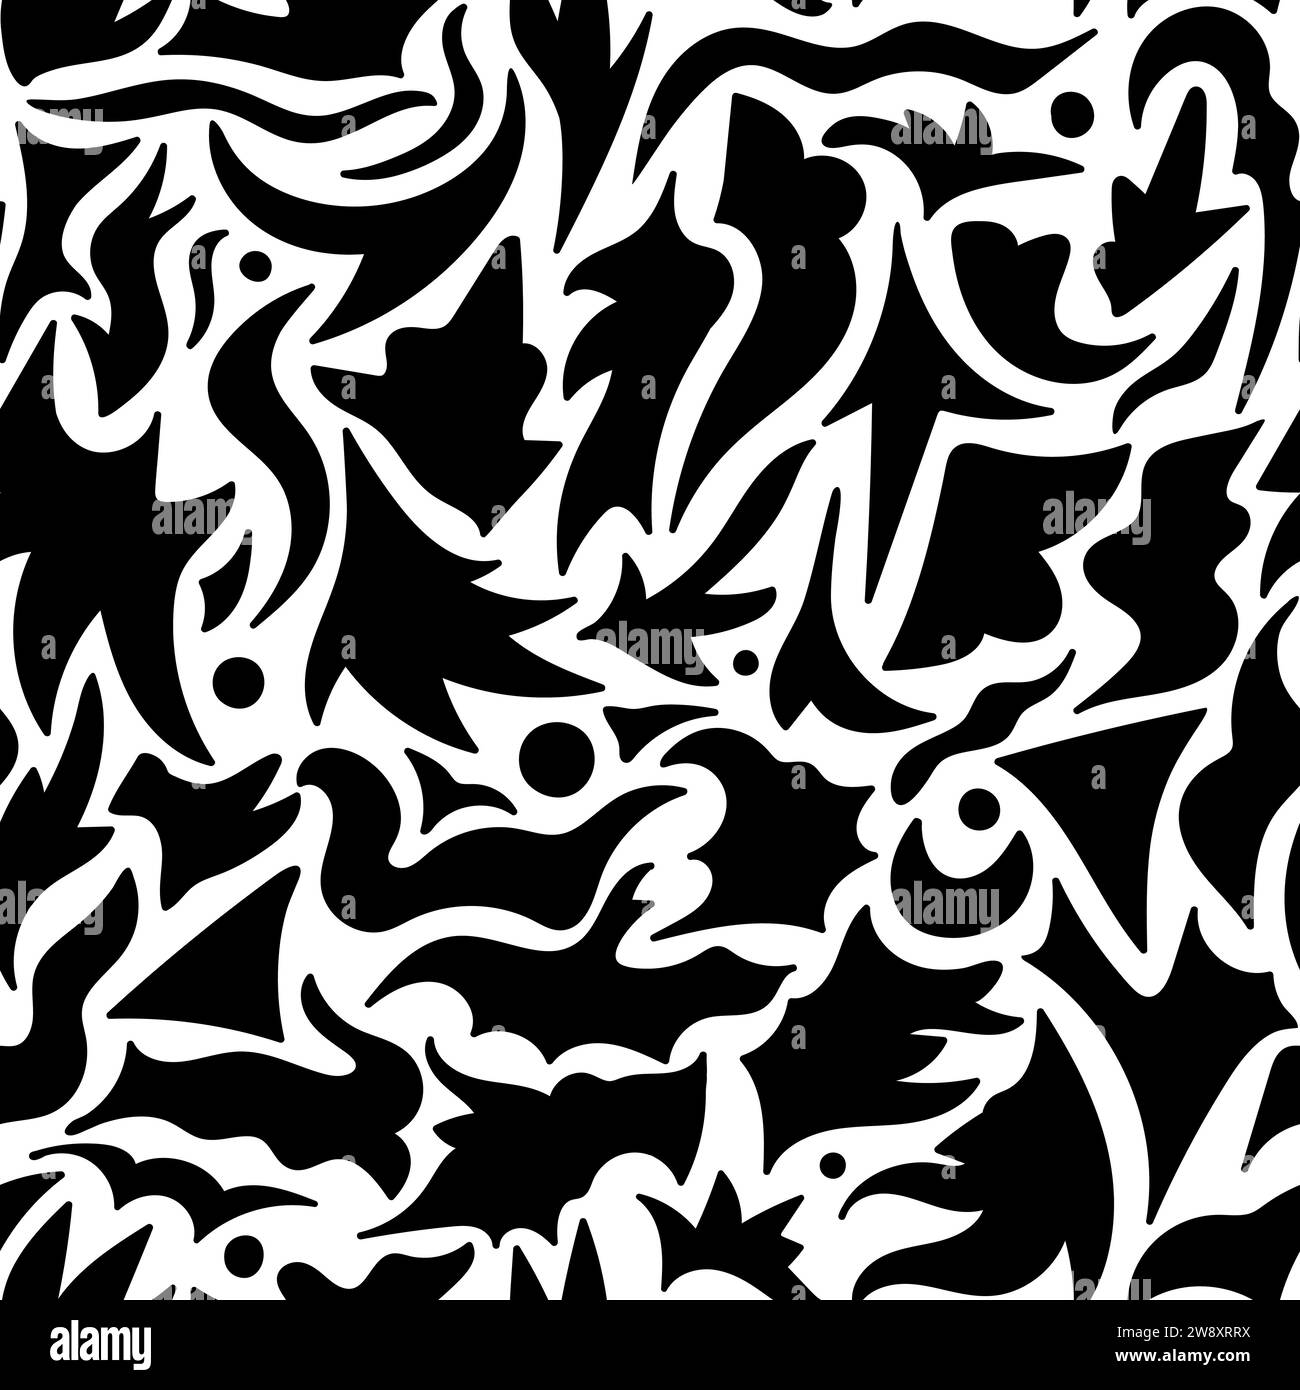 Abstract different hand drawn shapes seamless pattern. Black shapes on ...